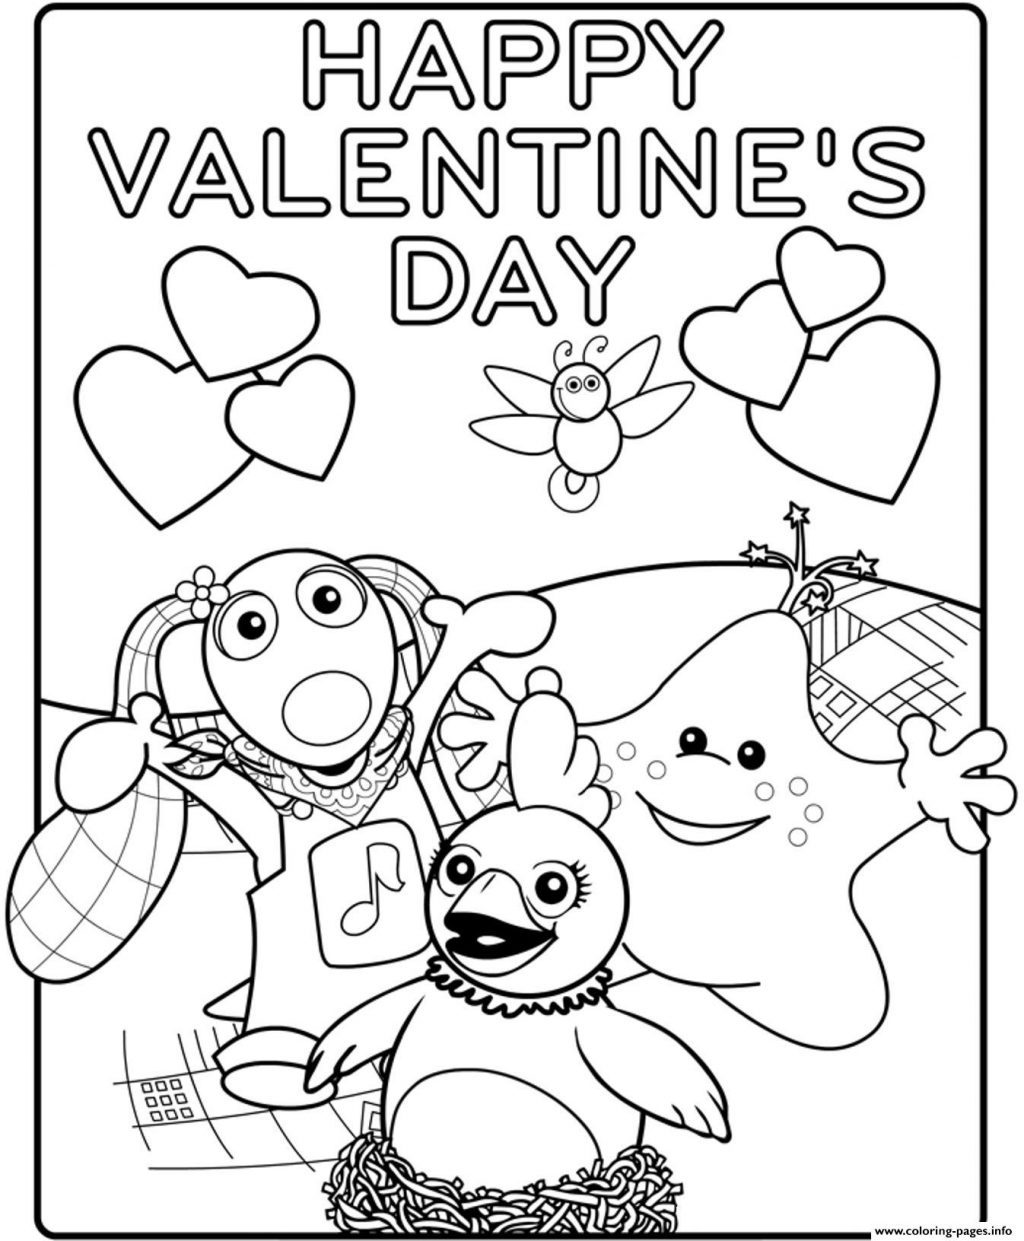 Valentine Coloring Page Coloring Page 1461709648kids Happy Valentines Day S18b3a Coloring